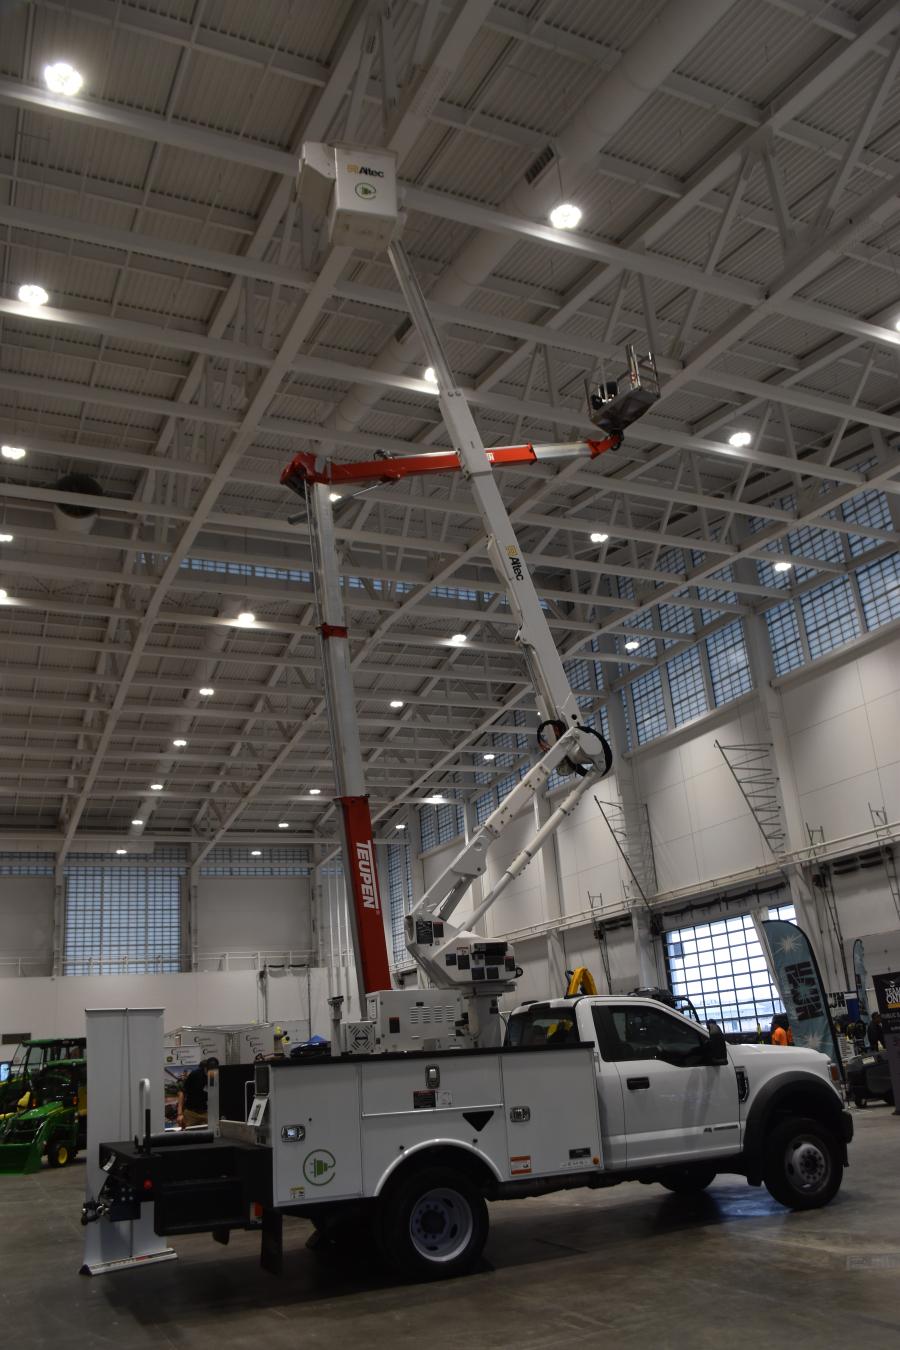 Altec lifts puts your employees in hard-to-reach places as safely as possible.
(CEG photo)